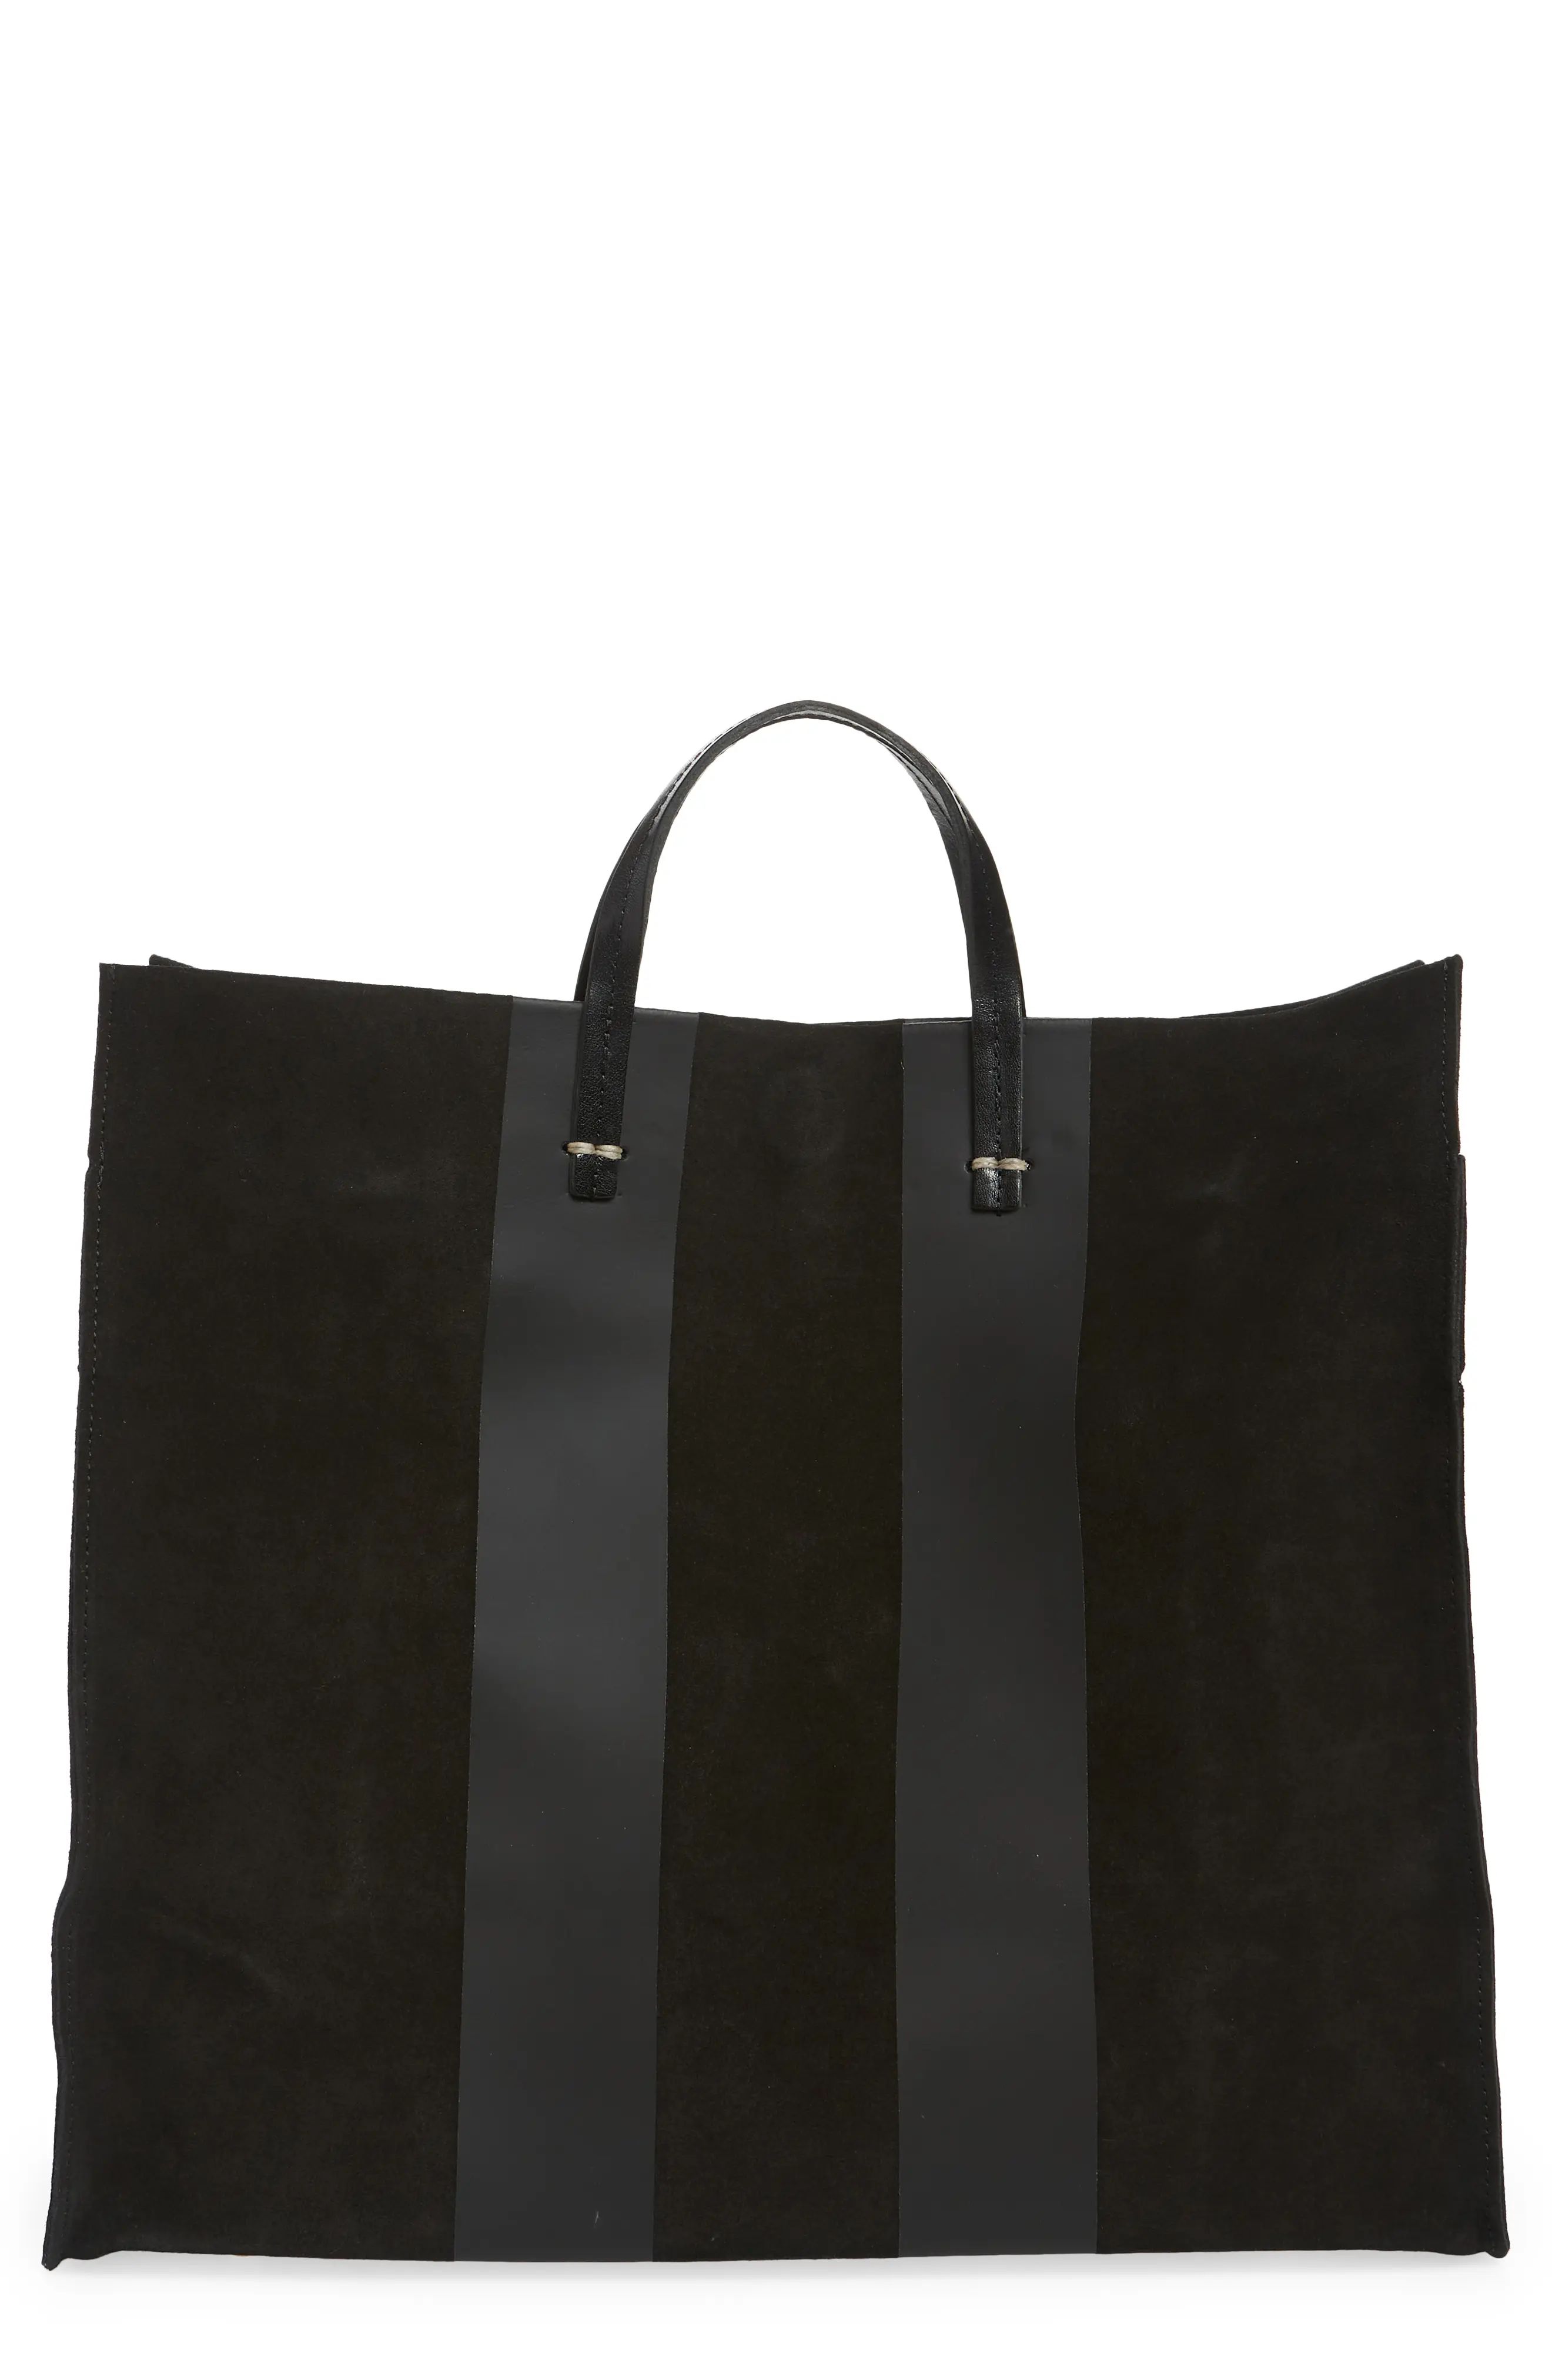 Clare V. Simple Leather & Suede Tote in Black Suede at Nordstrom | Nordstrom